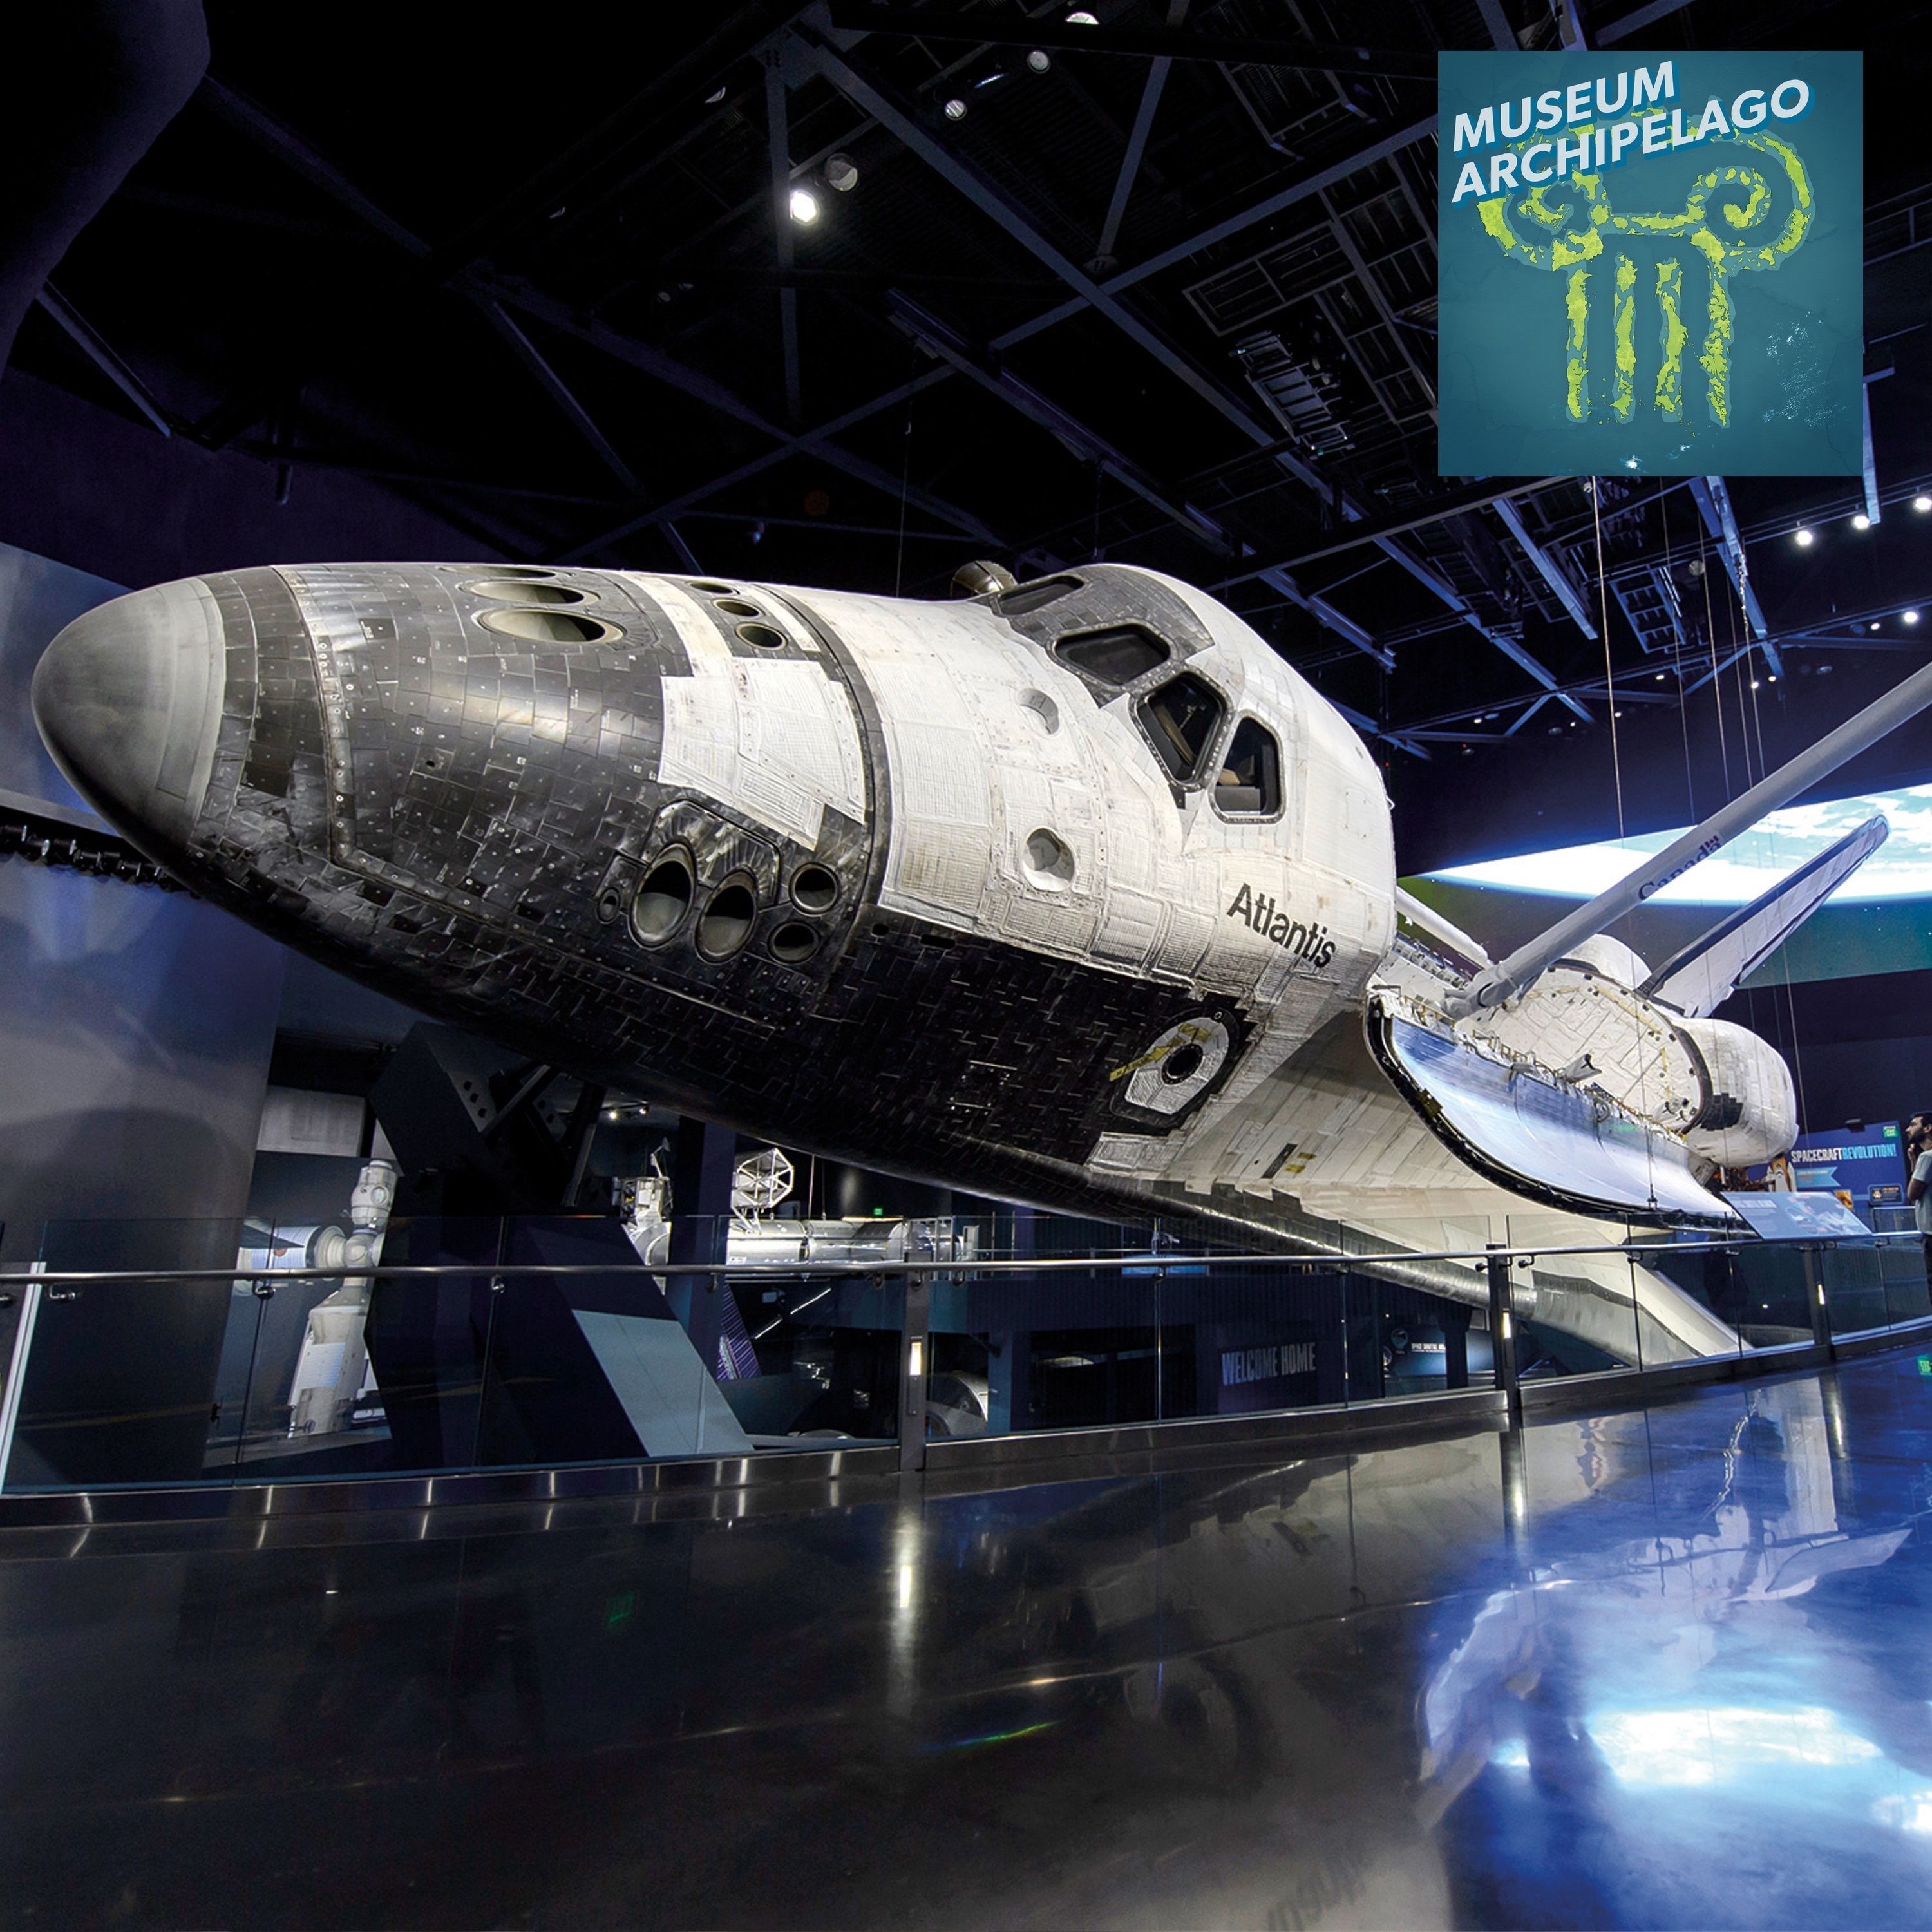 64. Kennedy Space Center's Shuttle Atlantis Experience Is Part Museum, Part Themed Attraction